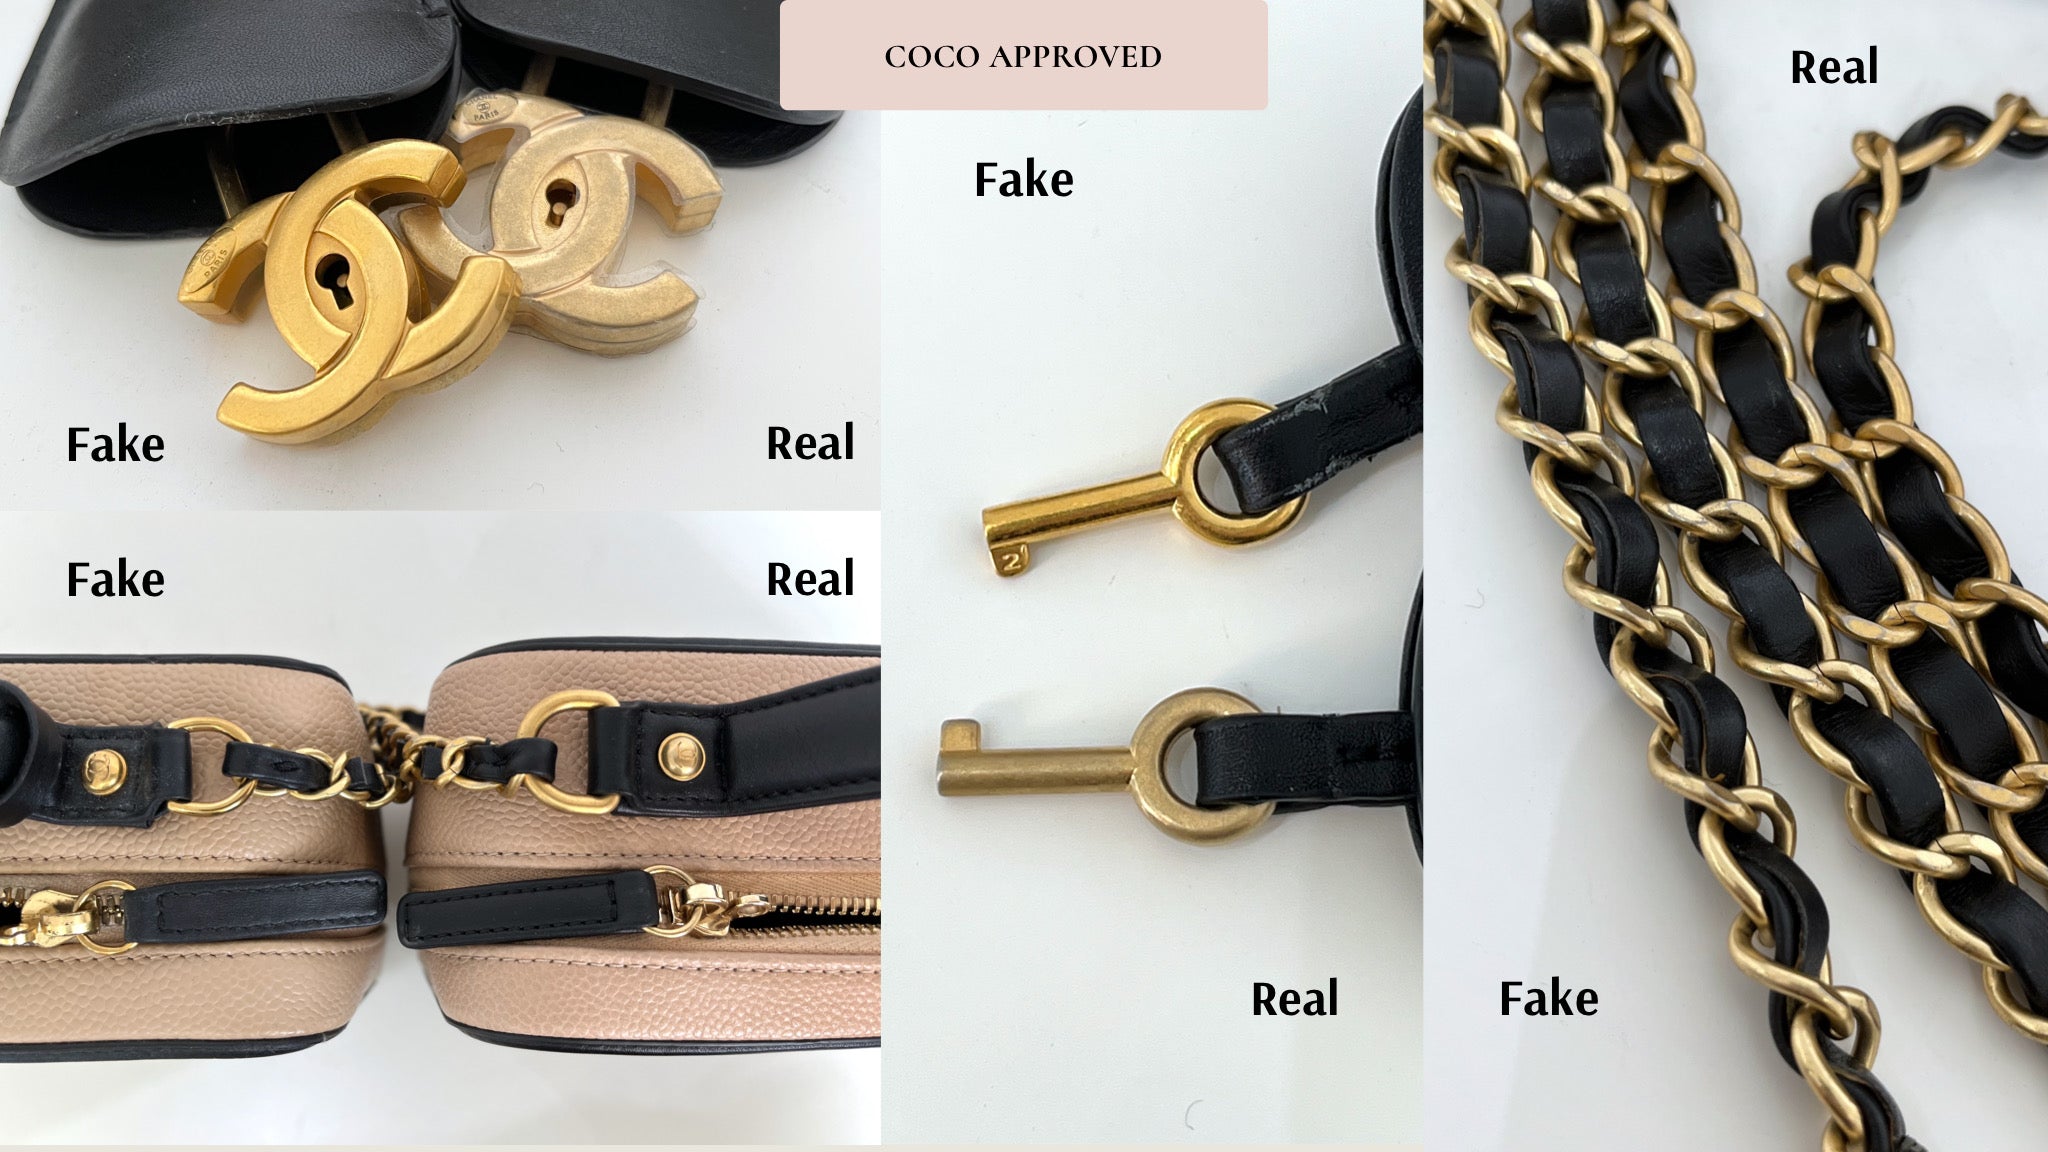 Could you tell which one is Real/Fake? Spot the Counterfeit!